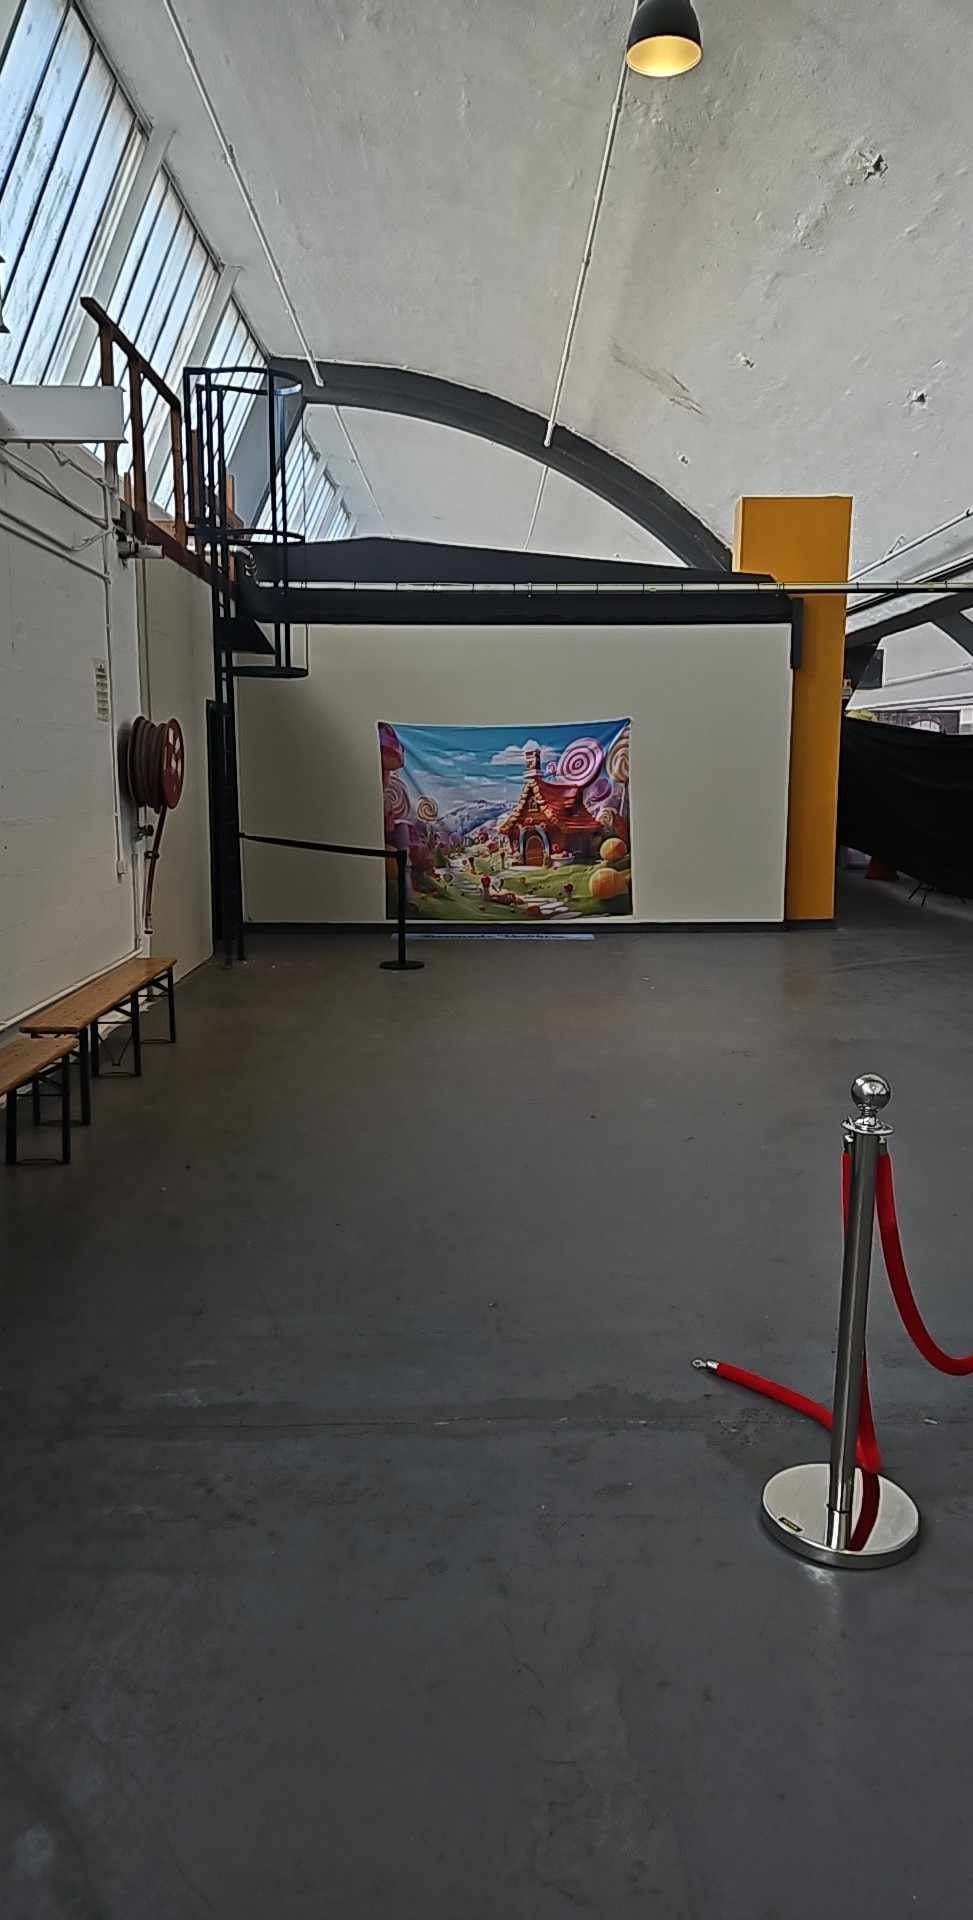 Empty exhibition space with a large animated movie poster on display